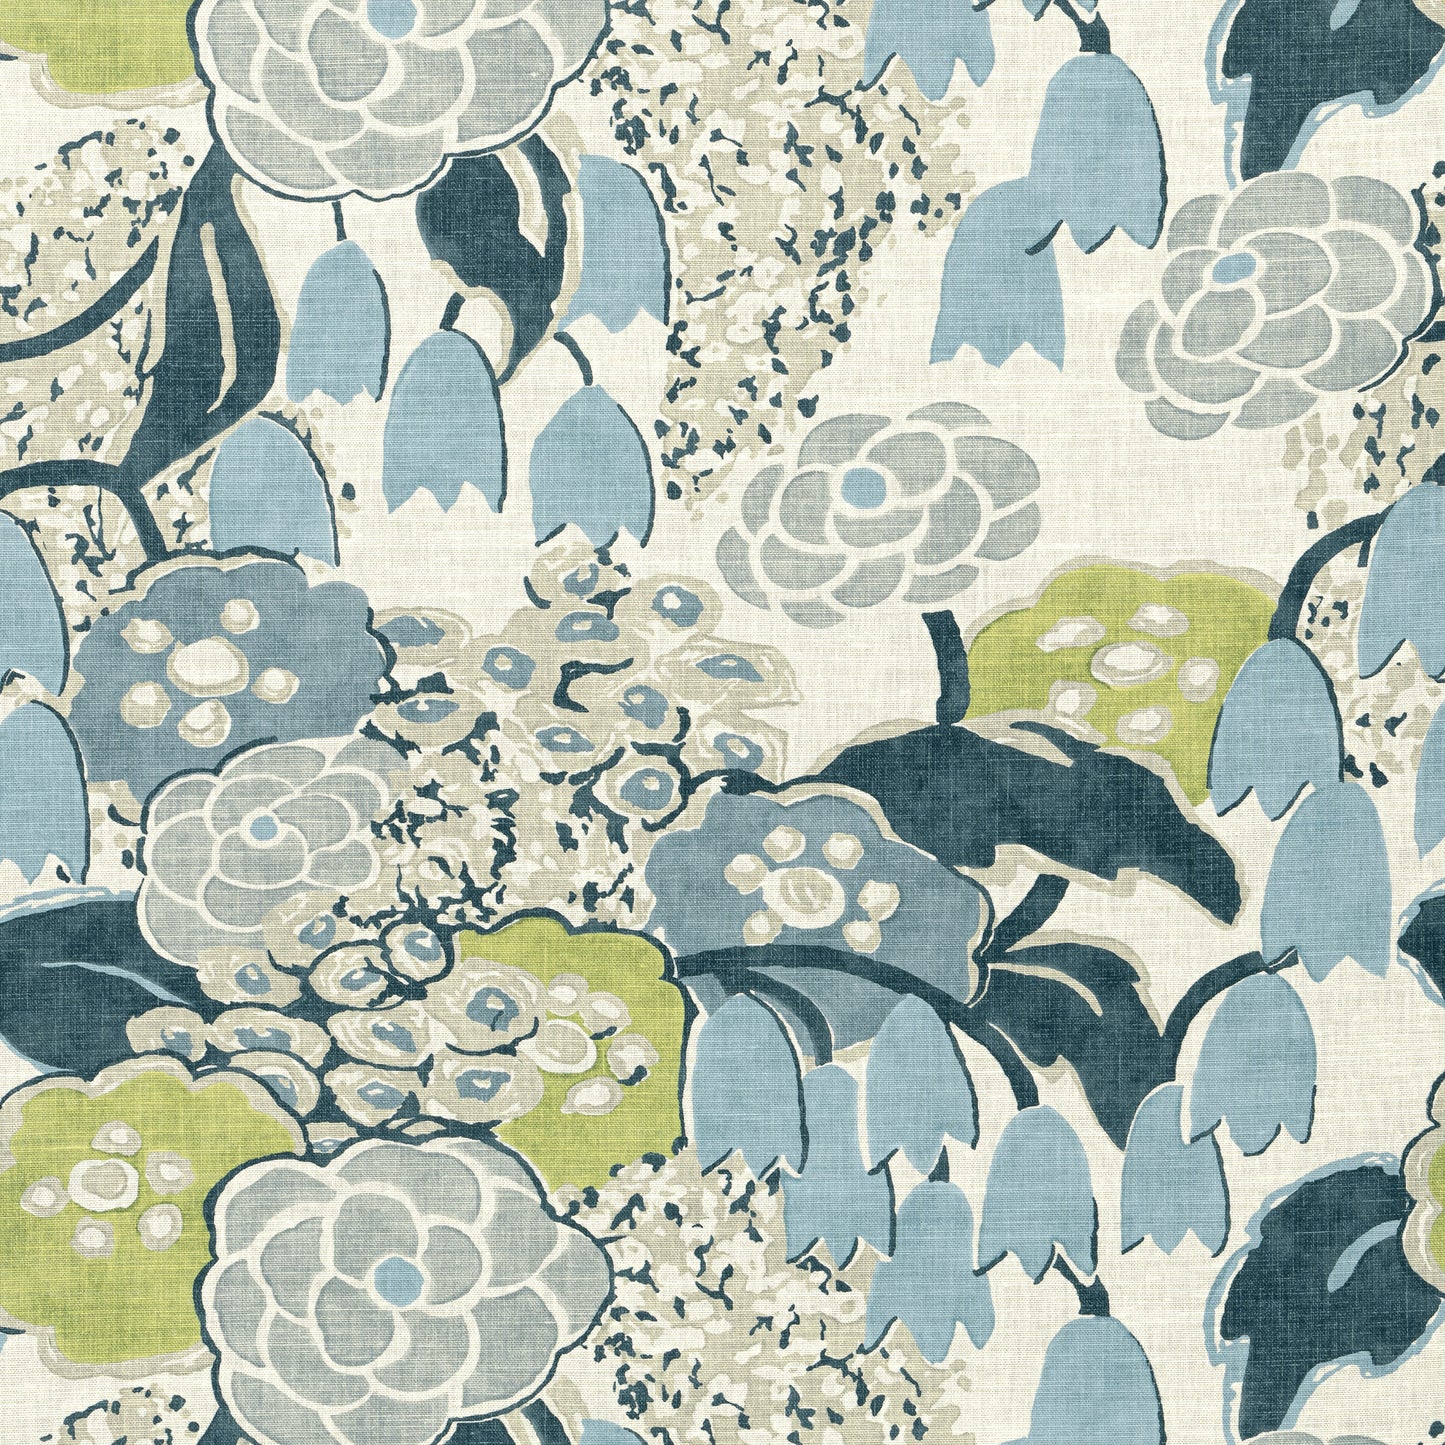 Purchase  Ann French Fabric Item# AF23104  pattern name  Laura